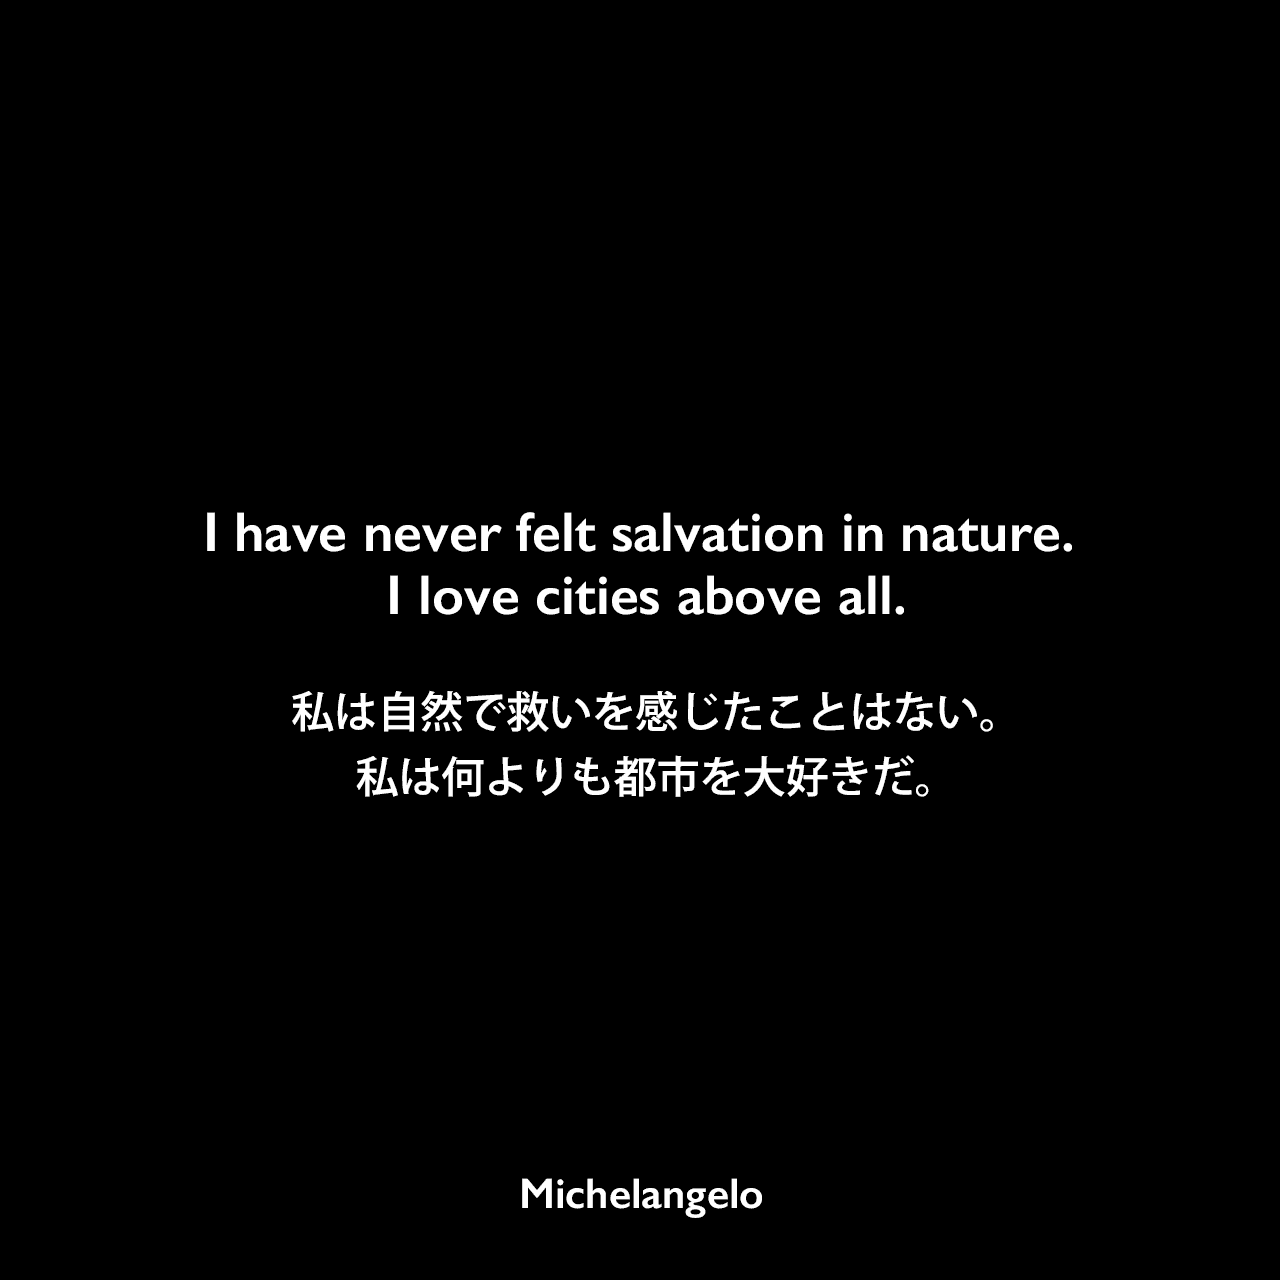 I have never felt salvation in nature. I love cities above all.私は自然で救いを感じたことはない。 私は何よりも都市を大好きだ。Michelangelo